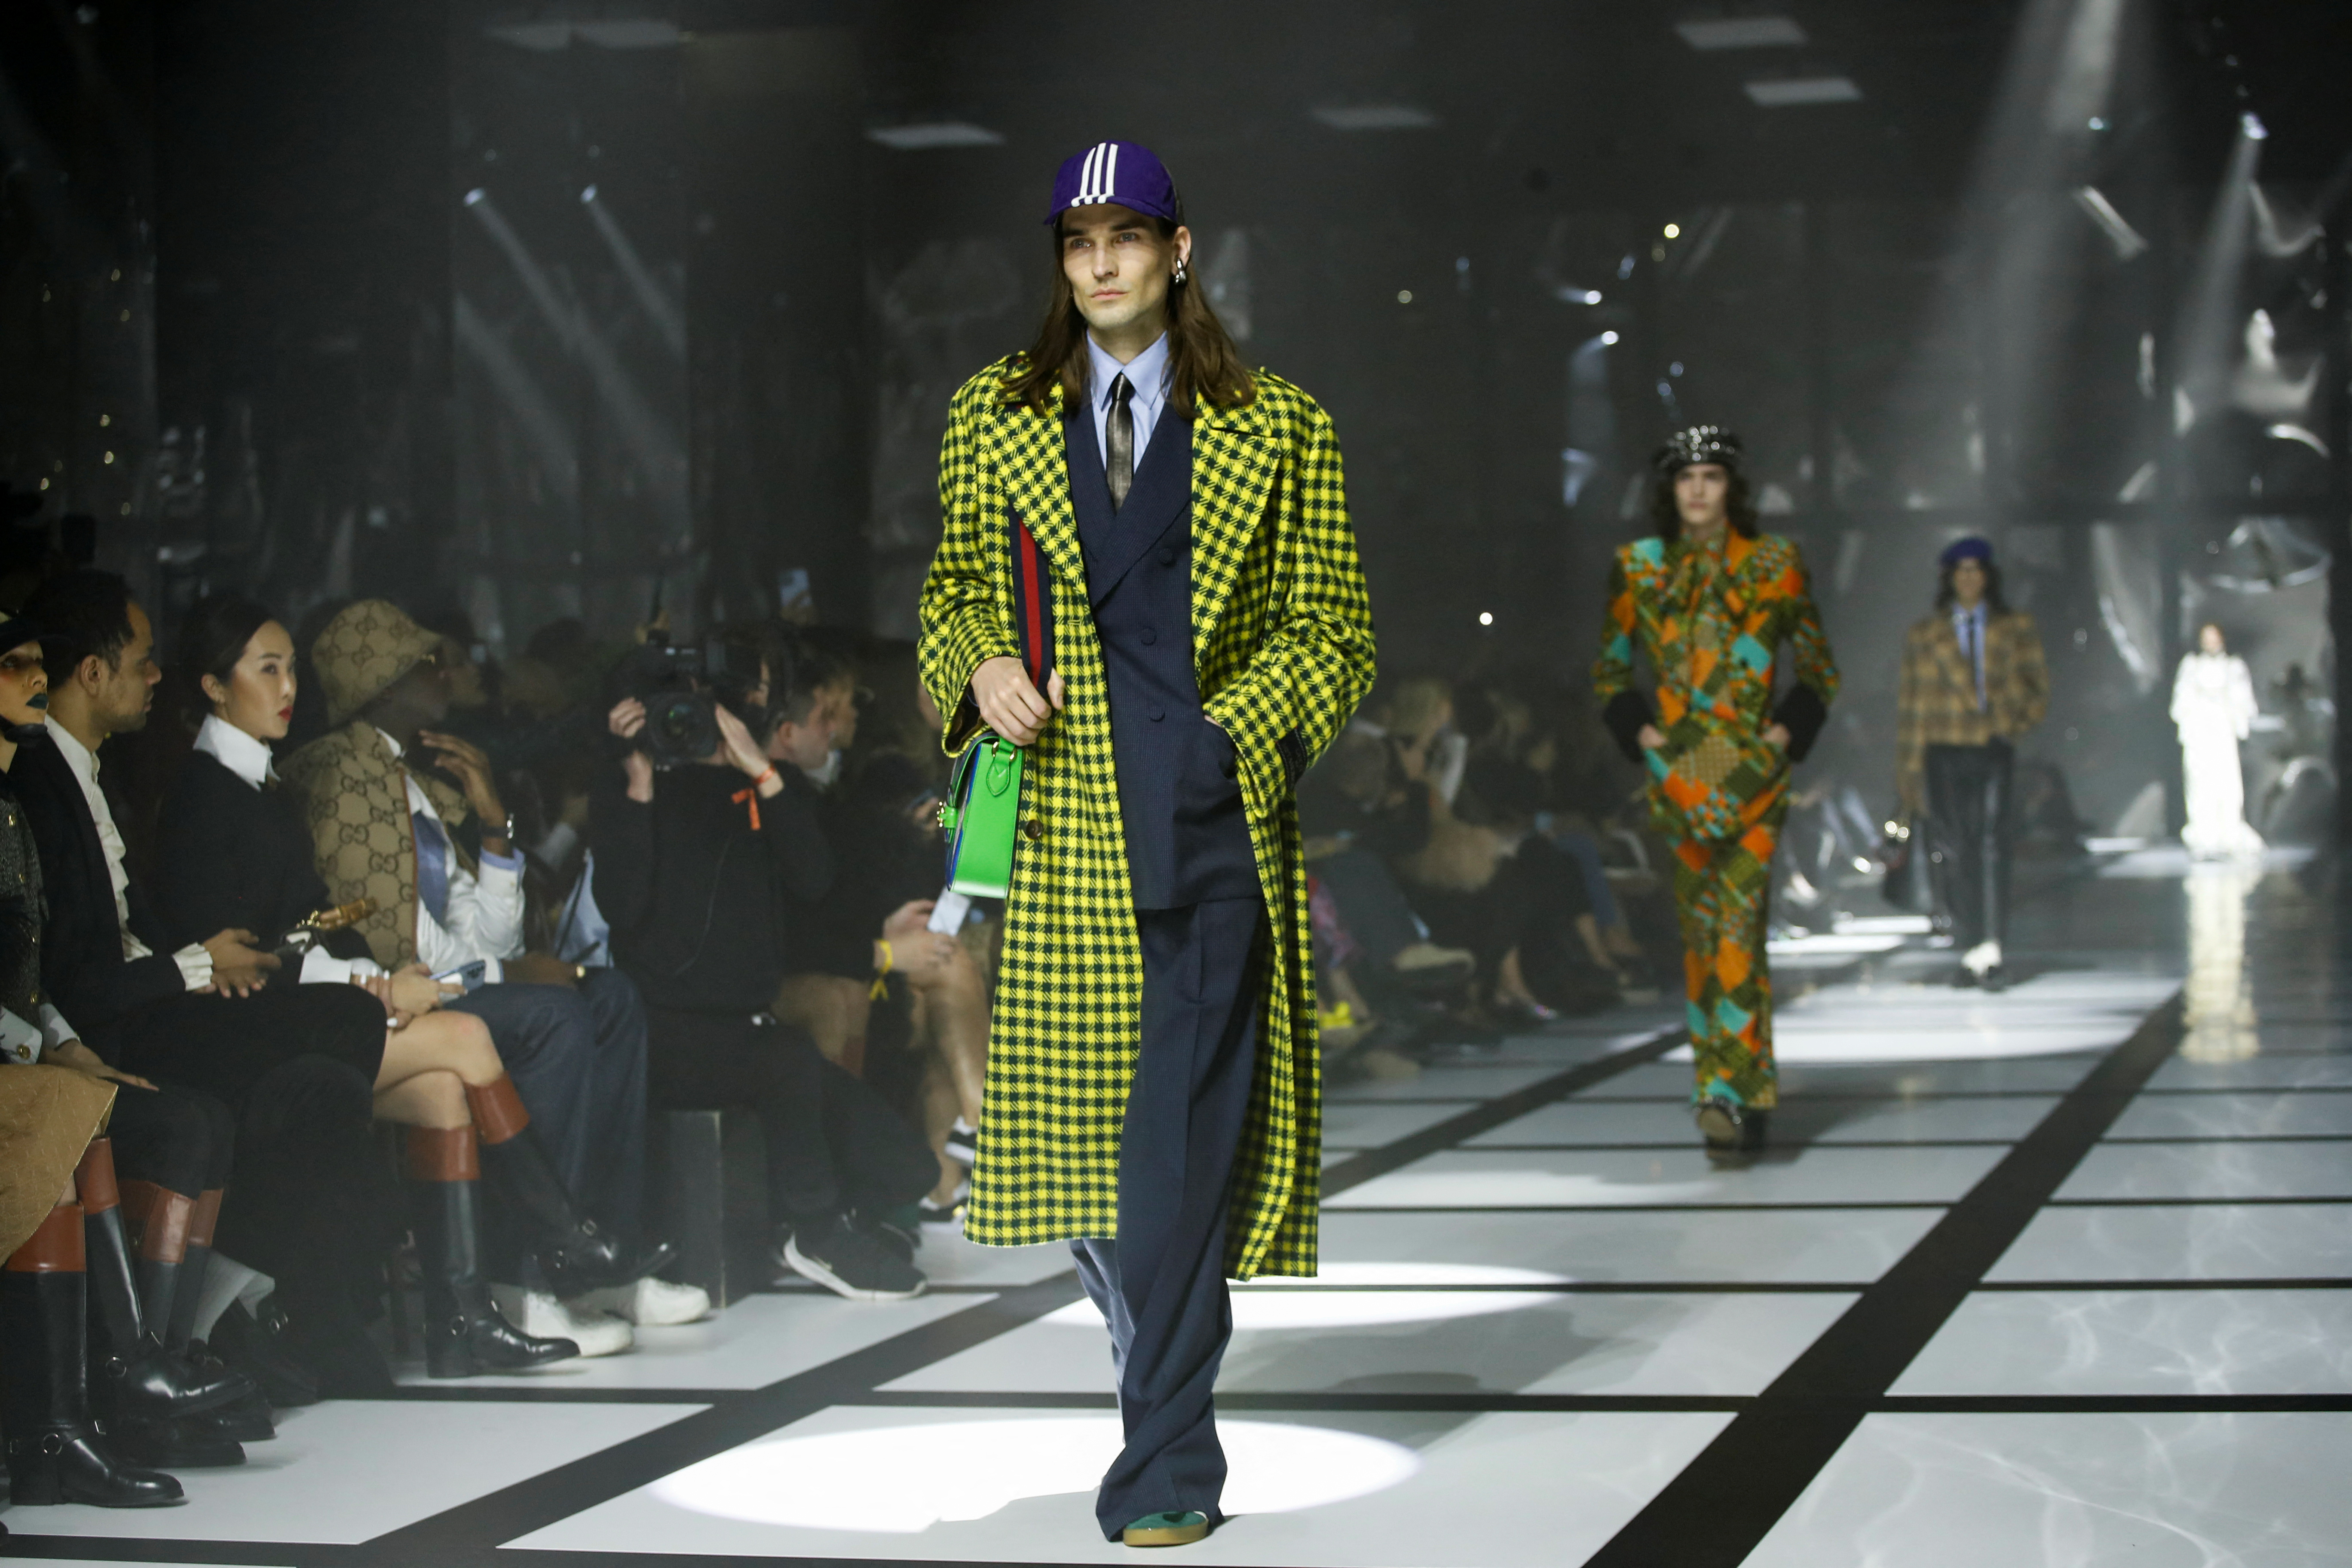 Gucci presents Fall-Winter 2022/2023 collection during the Milan Fashion Week